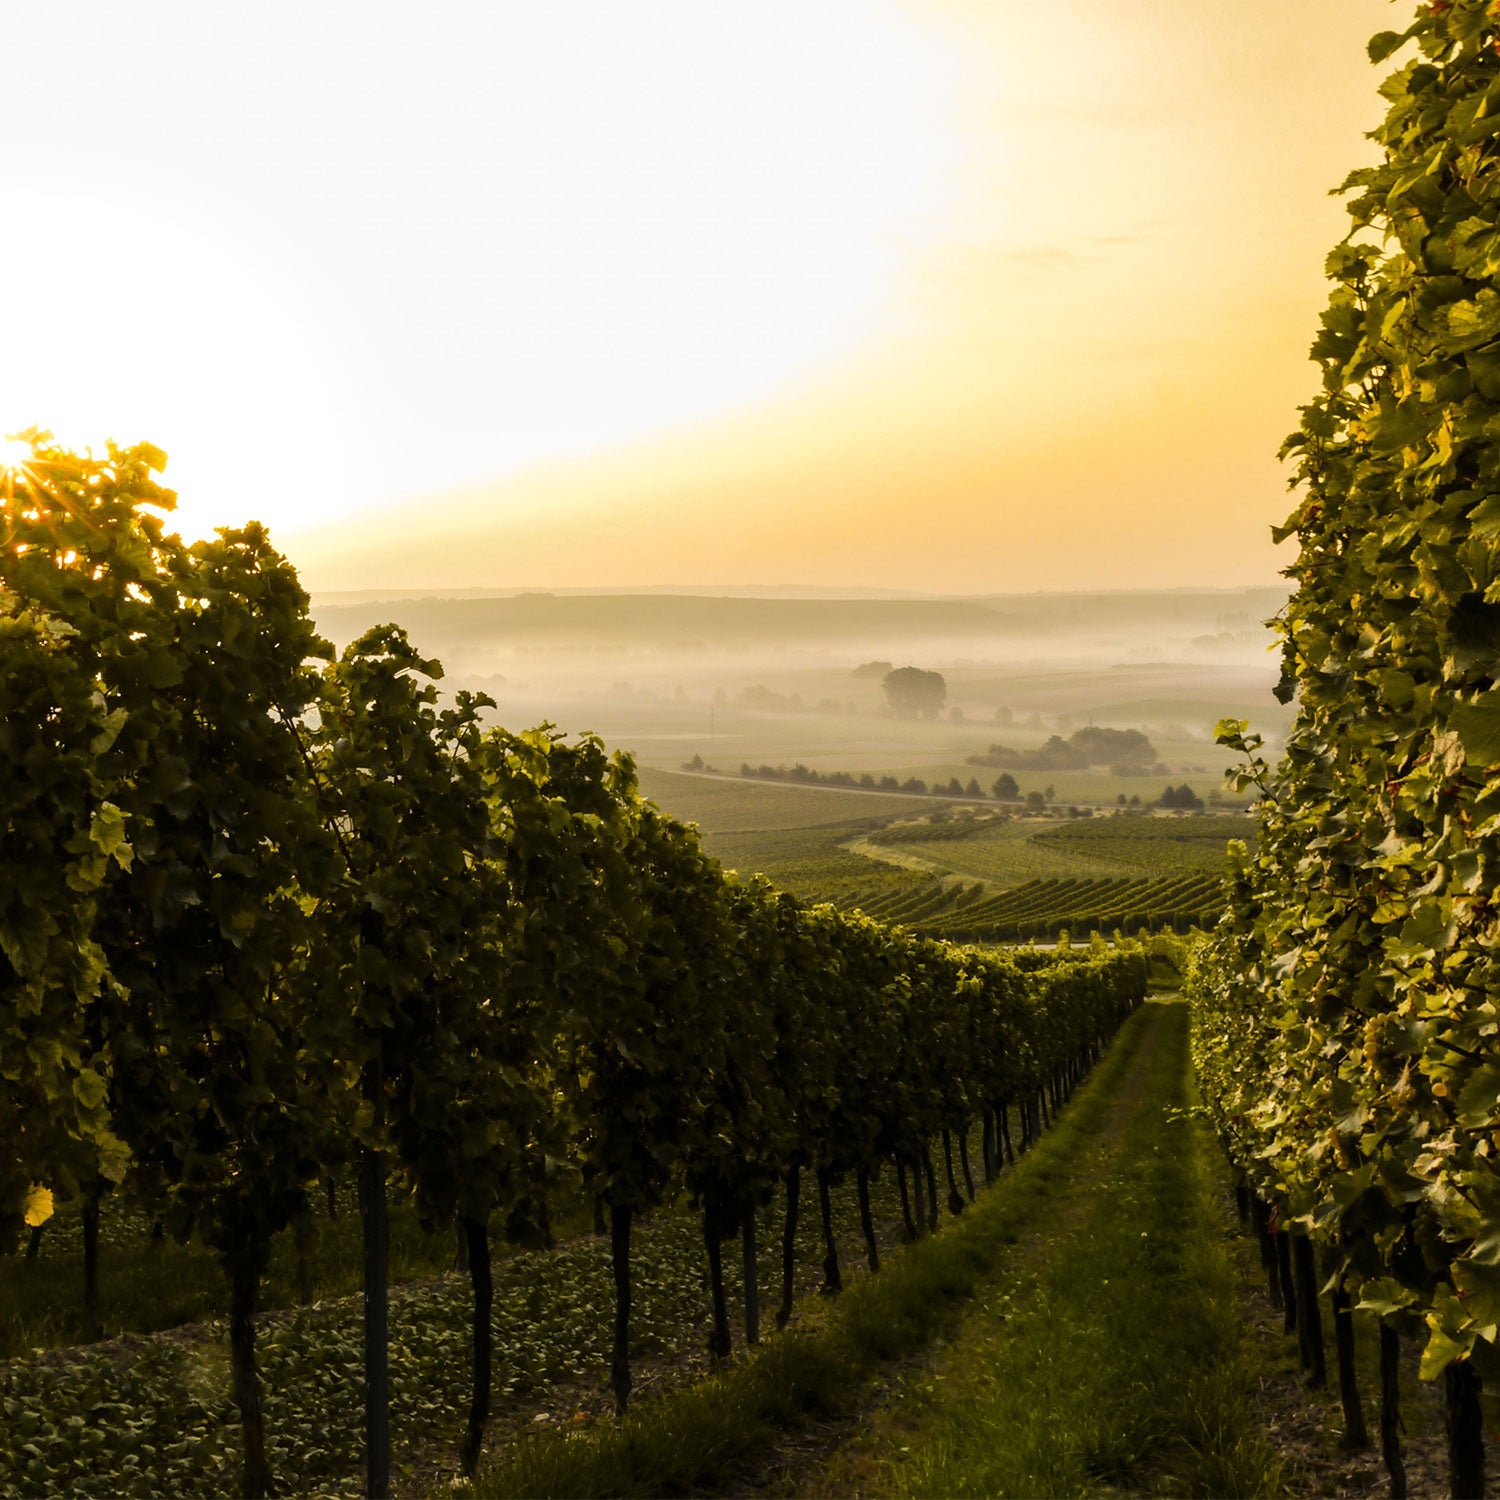 View from the vineyards towards the sunset in Saale-Unstrut